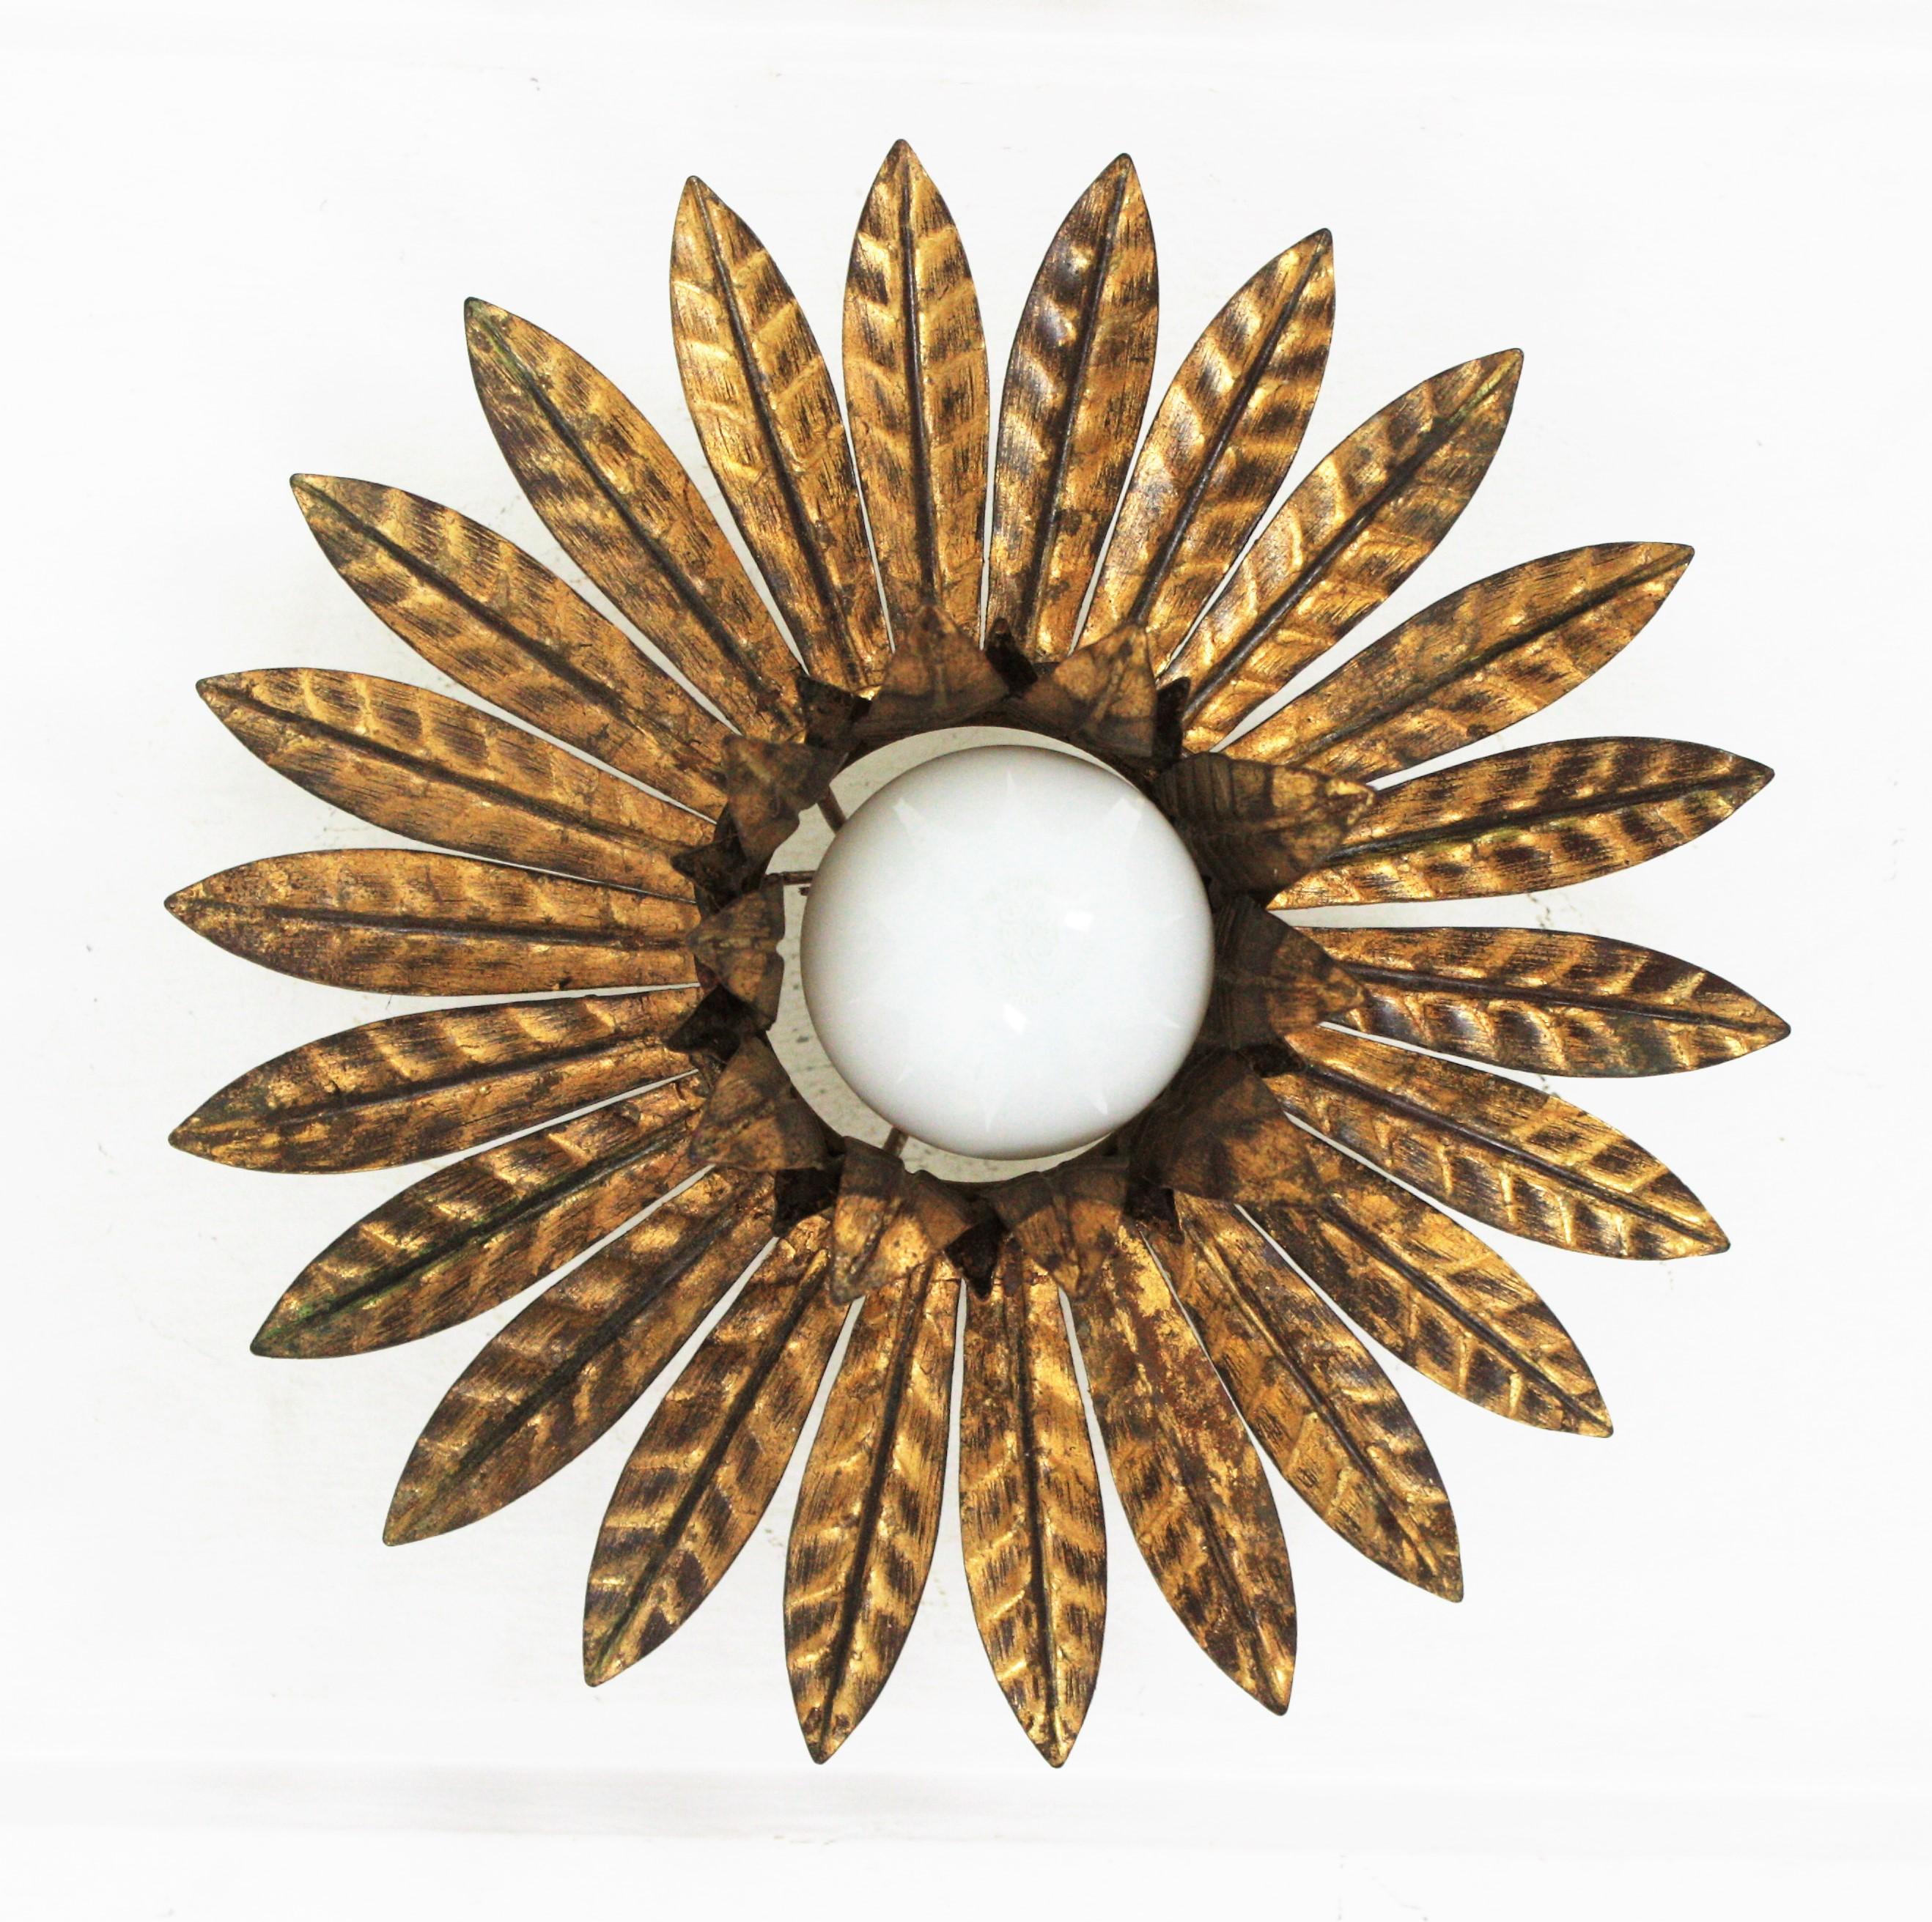 French Leaves Bouquet Crown Ceiling Light Fixture in Gilt Iron, 1940s For Sale 3